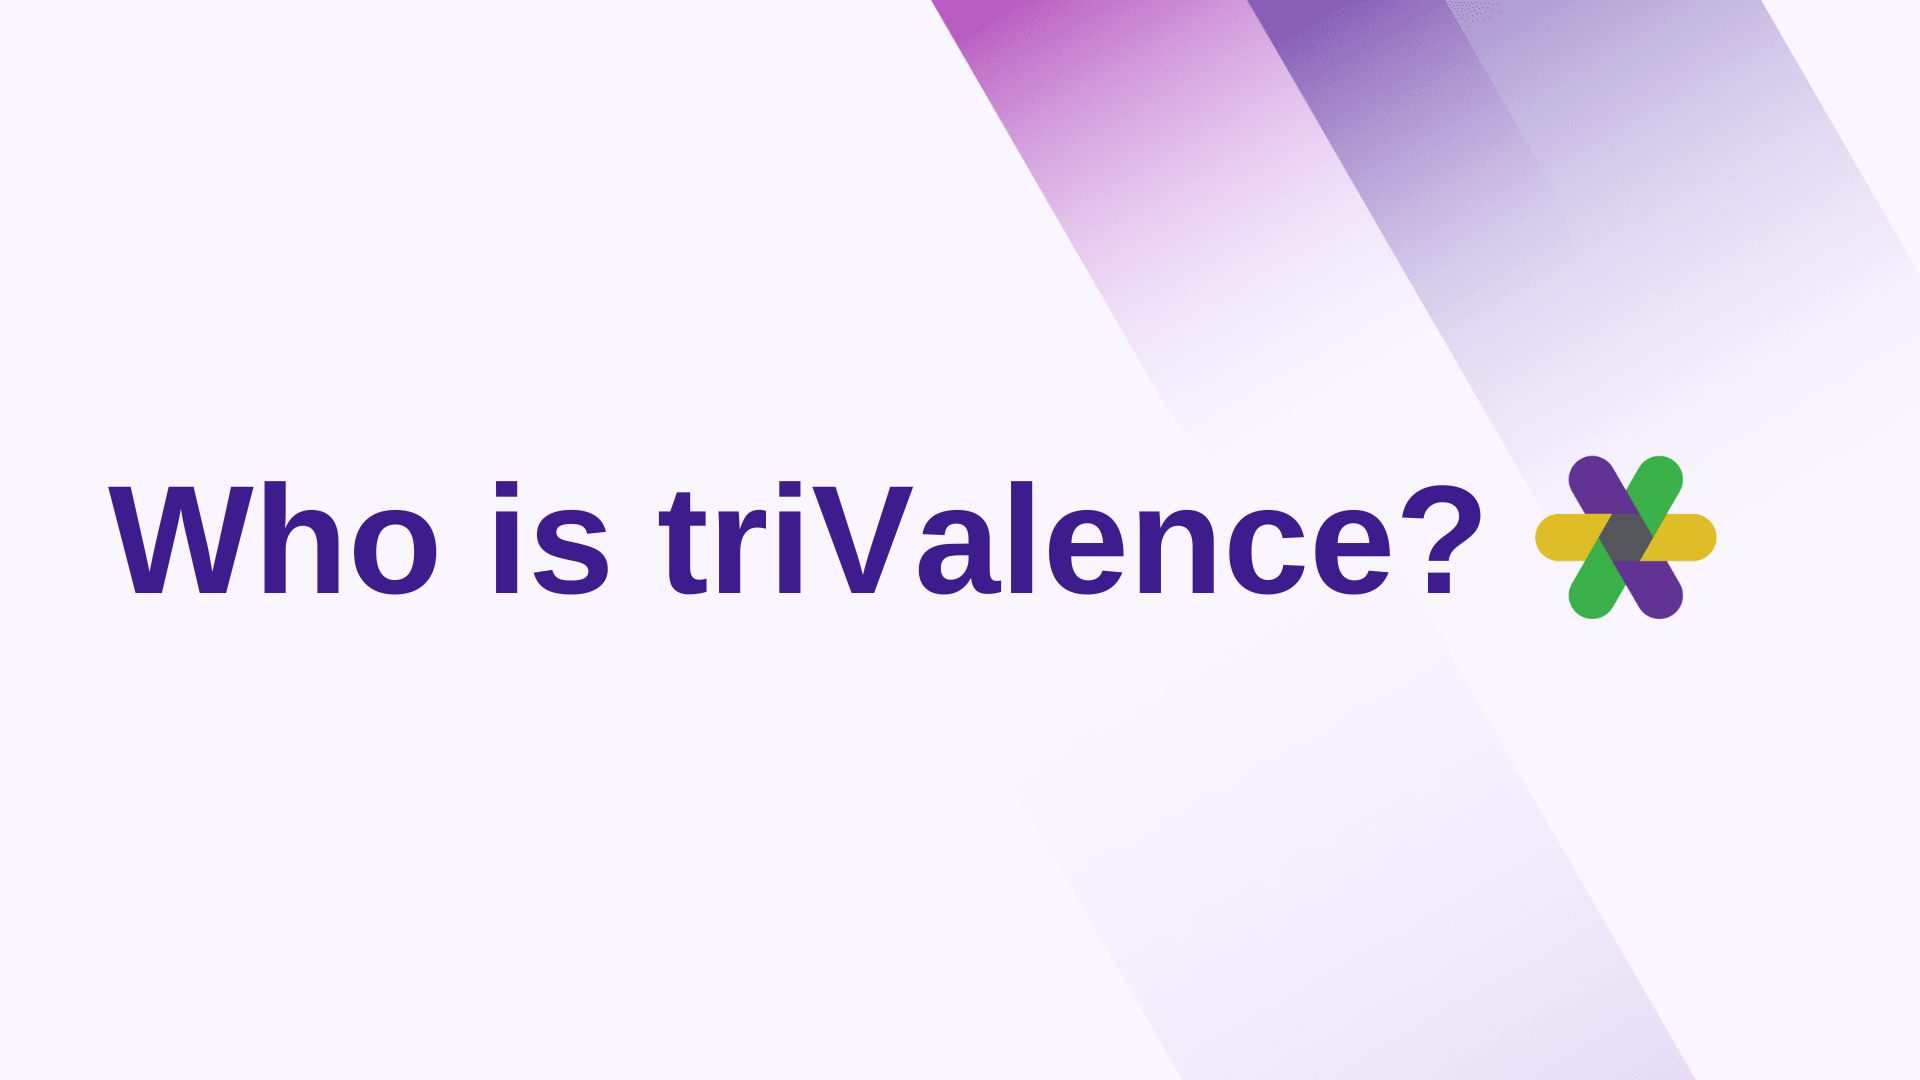 Who is triValence?